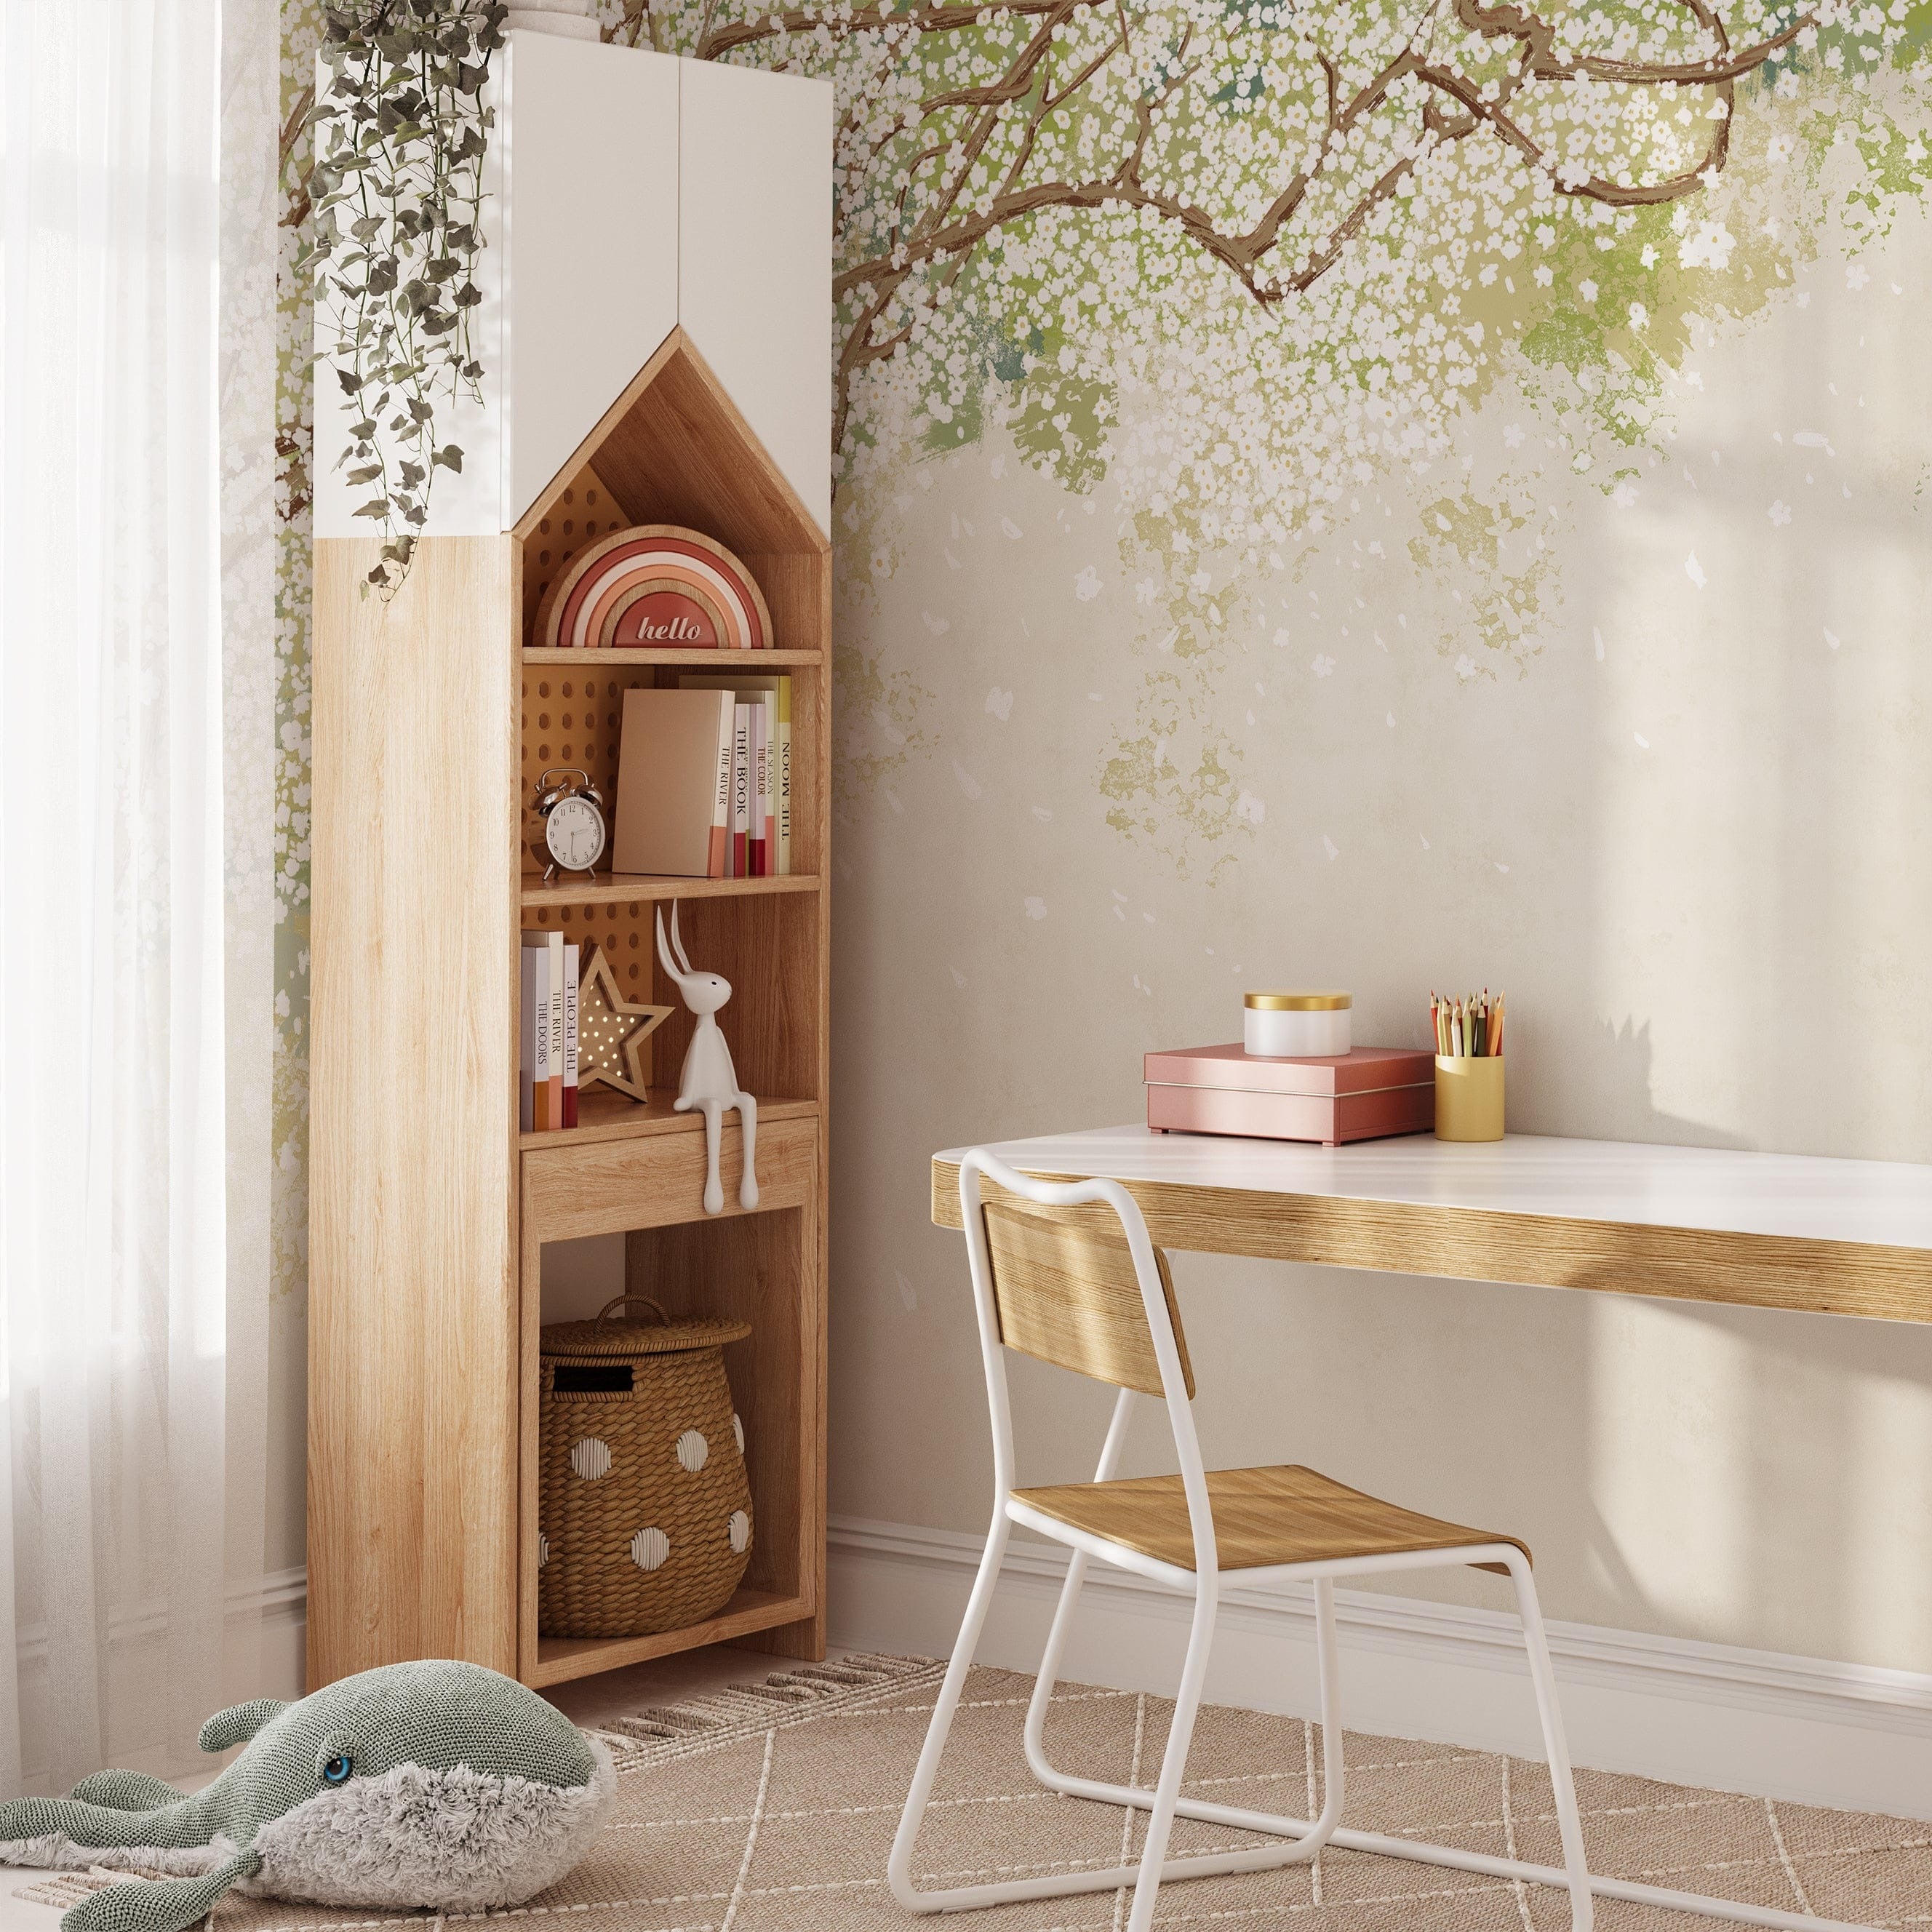 A well-organized study nook with a wooden desk, chair, and a tall bookshelf against a wall featuring the Sakura Serenade mural wallpaper. The wallpaper's design of cherry blossom branches with white flowers on a soft green and beige background adds a serene and elegant ambiance to the space.